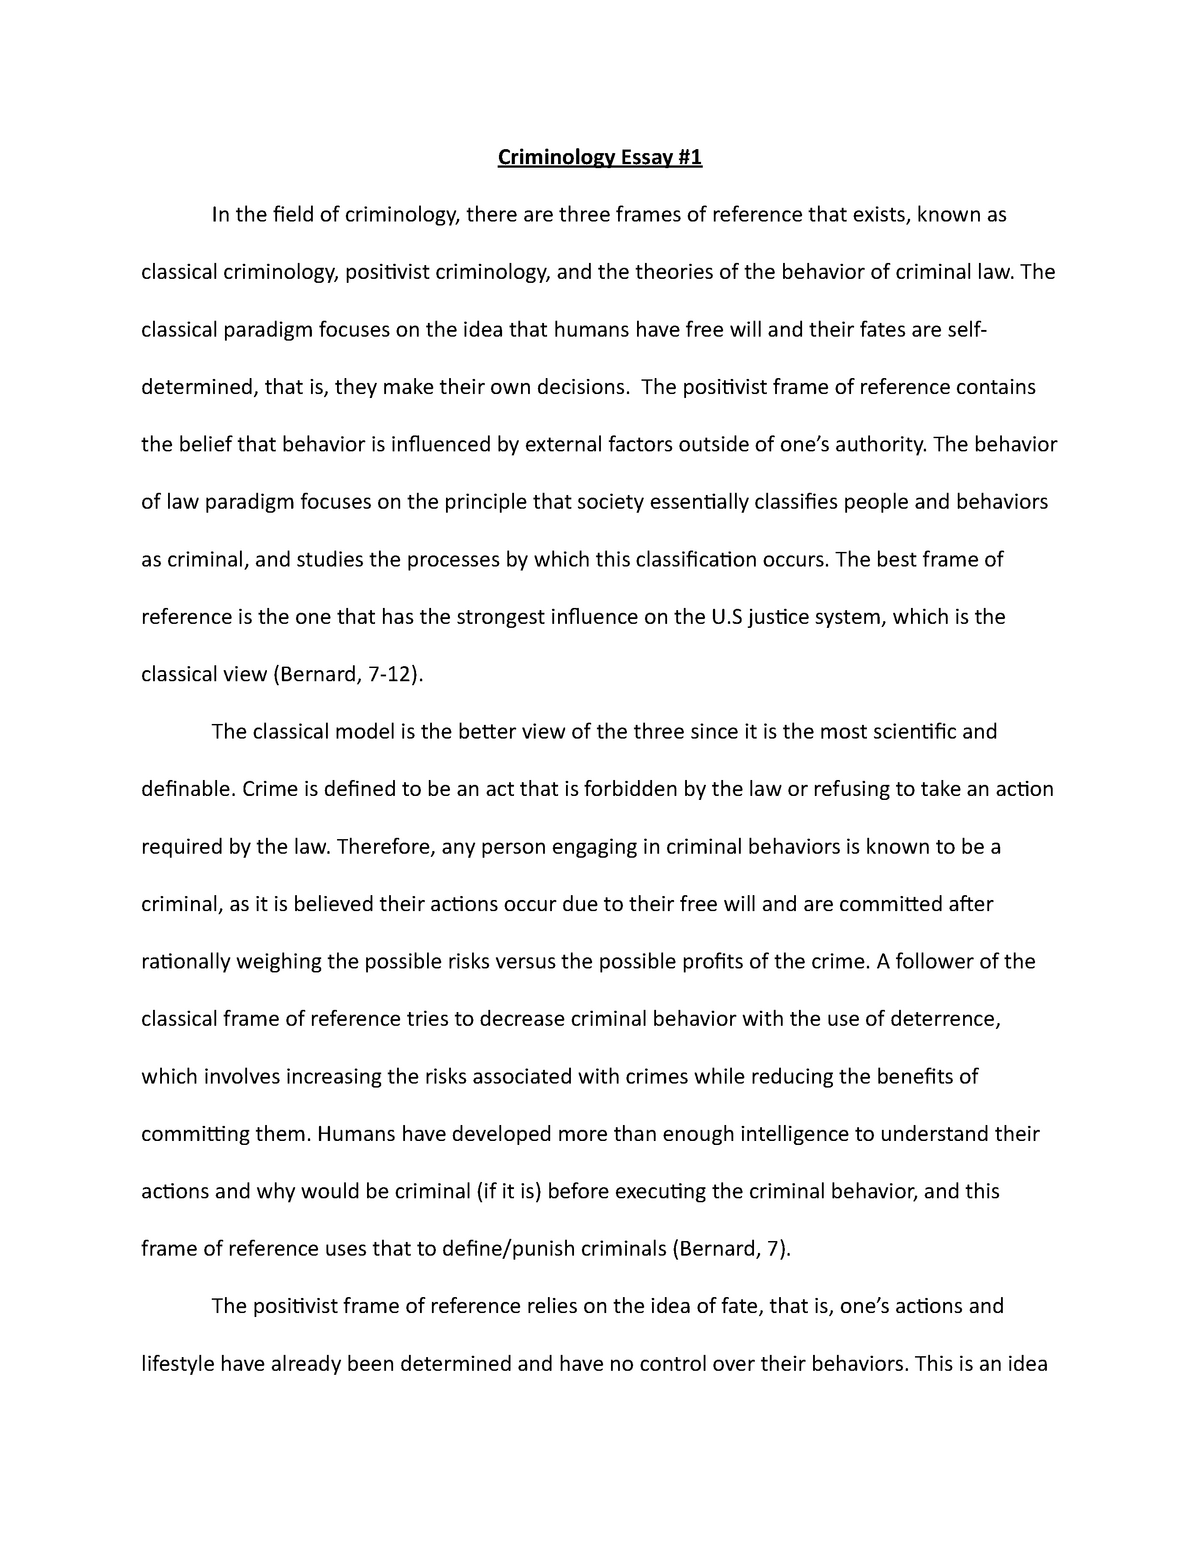 thesis about criminology pdf